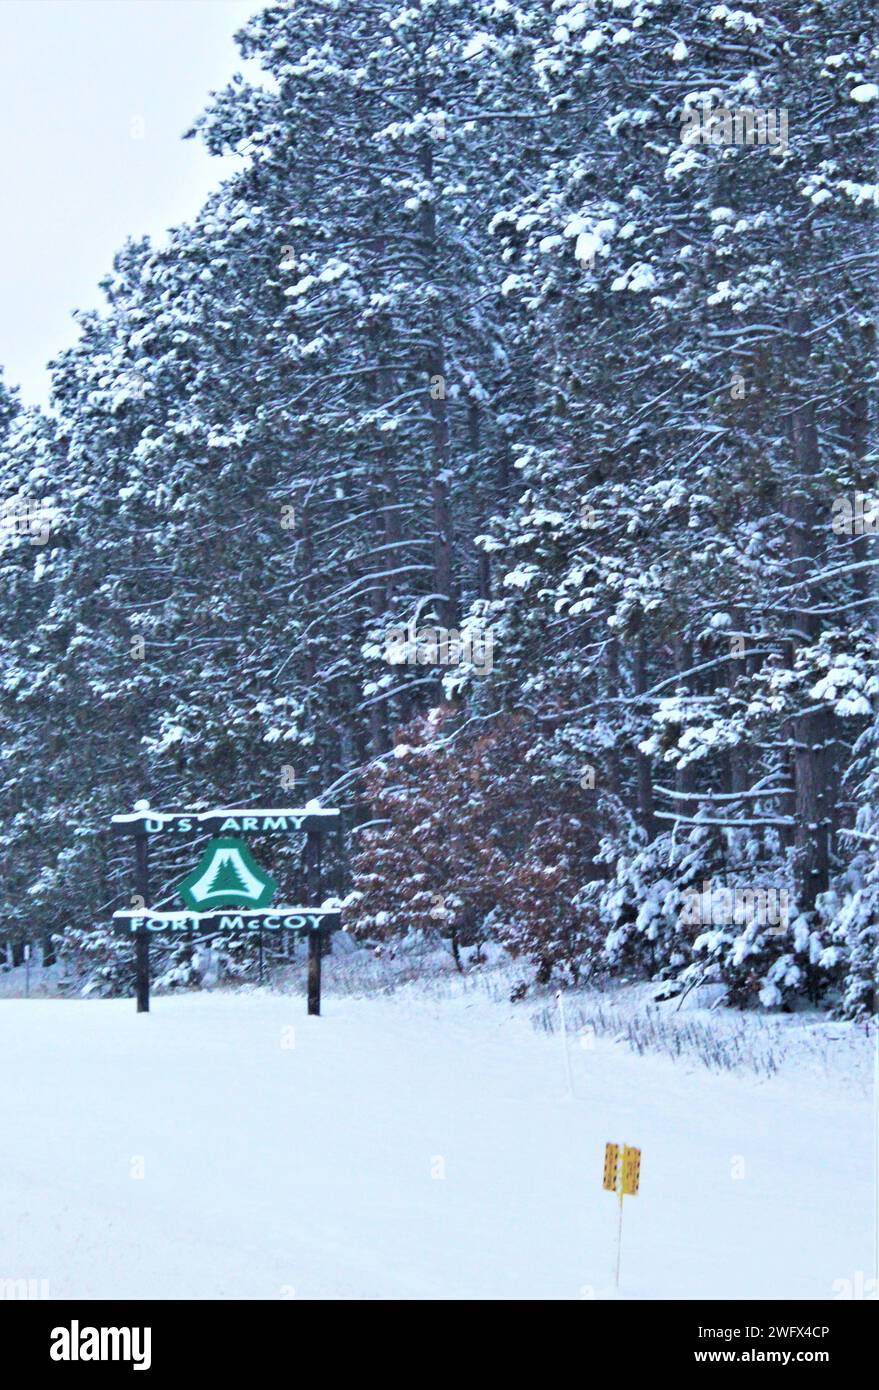 One of the installation signs is shown covered in snow Jan. 11, 2024, at Fort McCoy, Wis. Between Jan. 9-13, 2024, at Fort McCoy, the installation received more than 18 inches of snow over that span, plus the snowfall was followed by below-zero temperatures. The snowy weather also caused the installation to go to minimal staffing on Jan. 9 and 12 as driving conditions in the local areas were considered less than favorable. Stock Photo